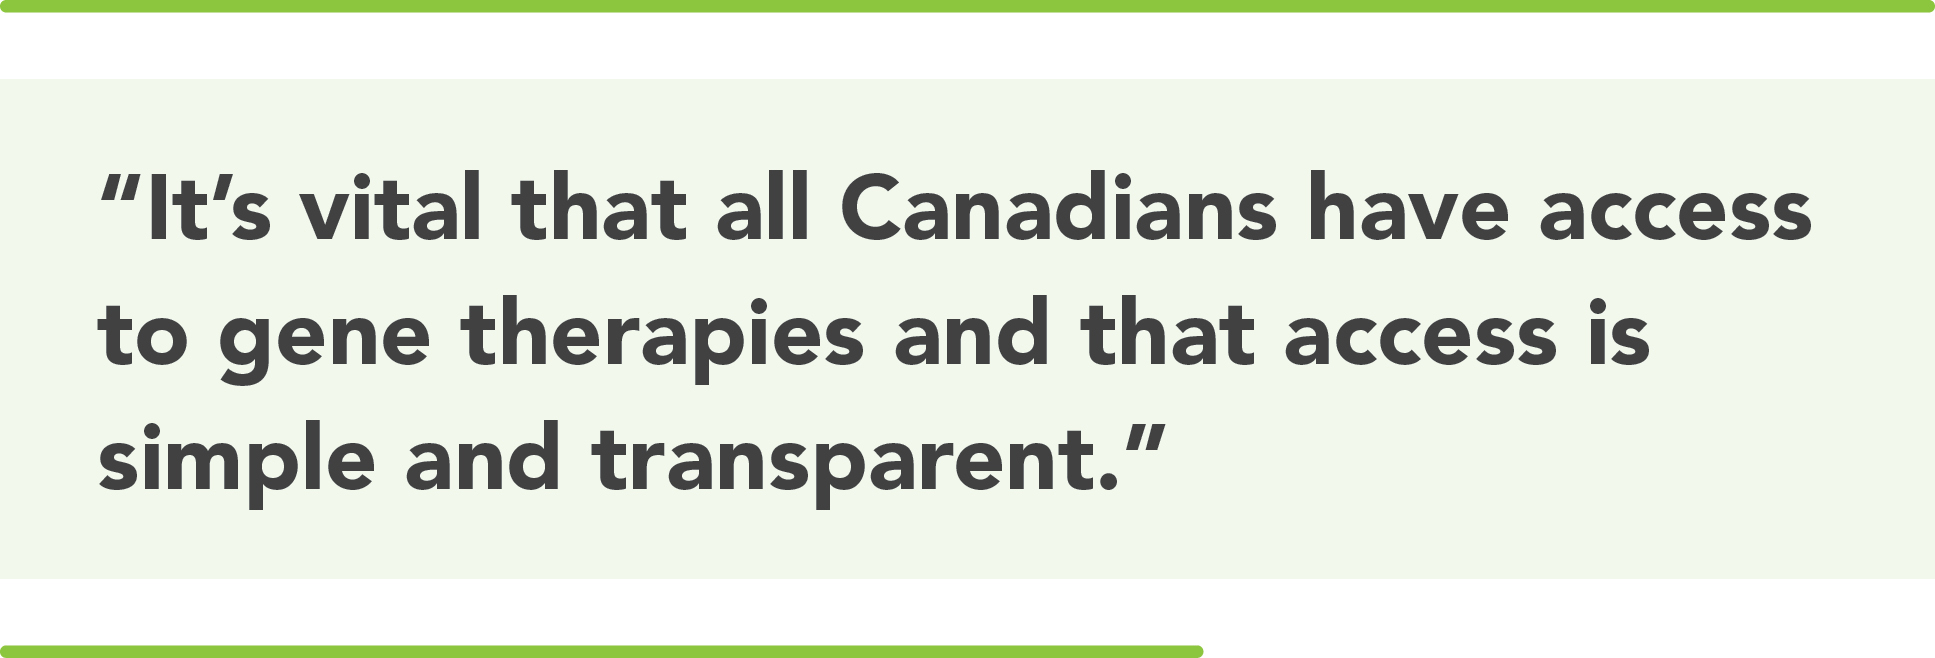 Pull Quote: It’s vital that all Canadians have access to gene therapies and that access is simple and transparent.